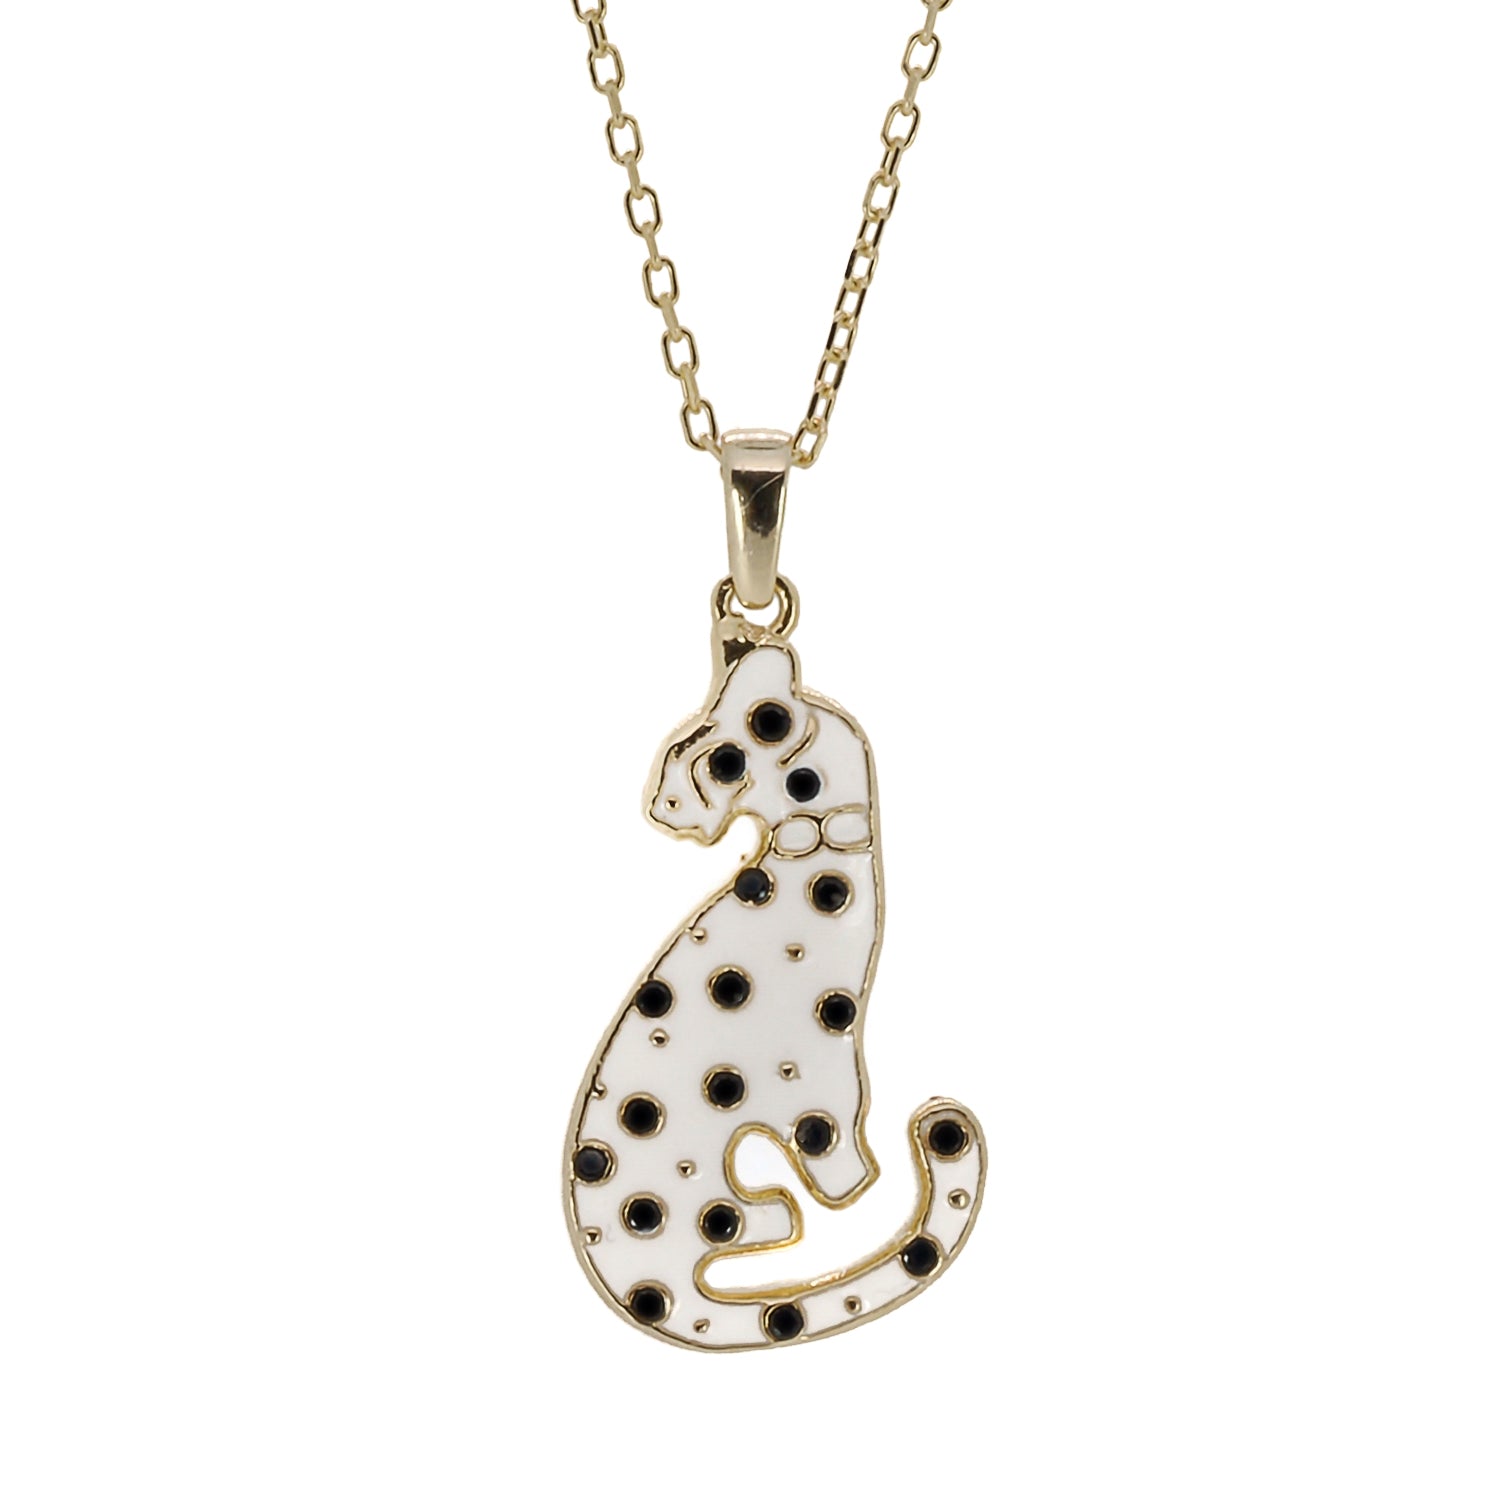 Gold Dalmatian Necklace featuring a sterling silver chain with an 18K gold plated finish, adorned with a delightful dalmatian dog pendant in white and black enamel.